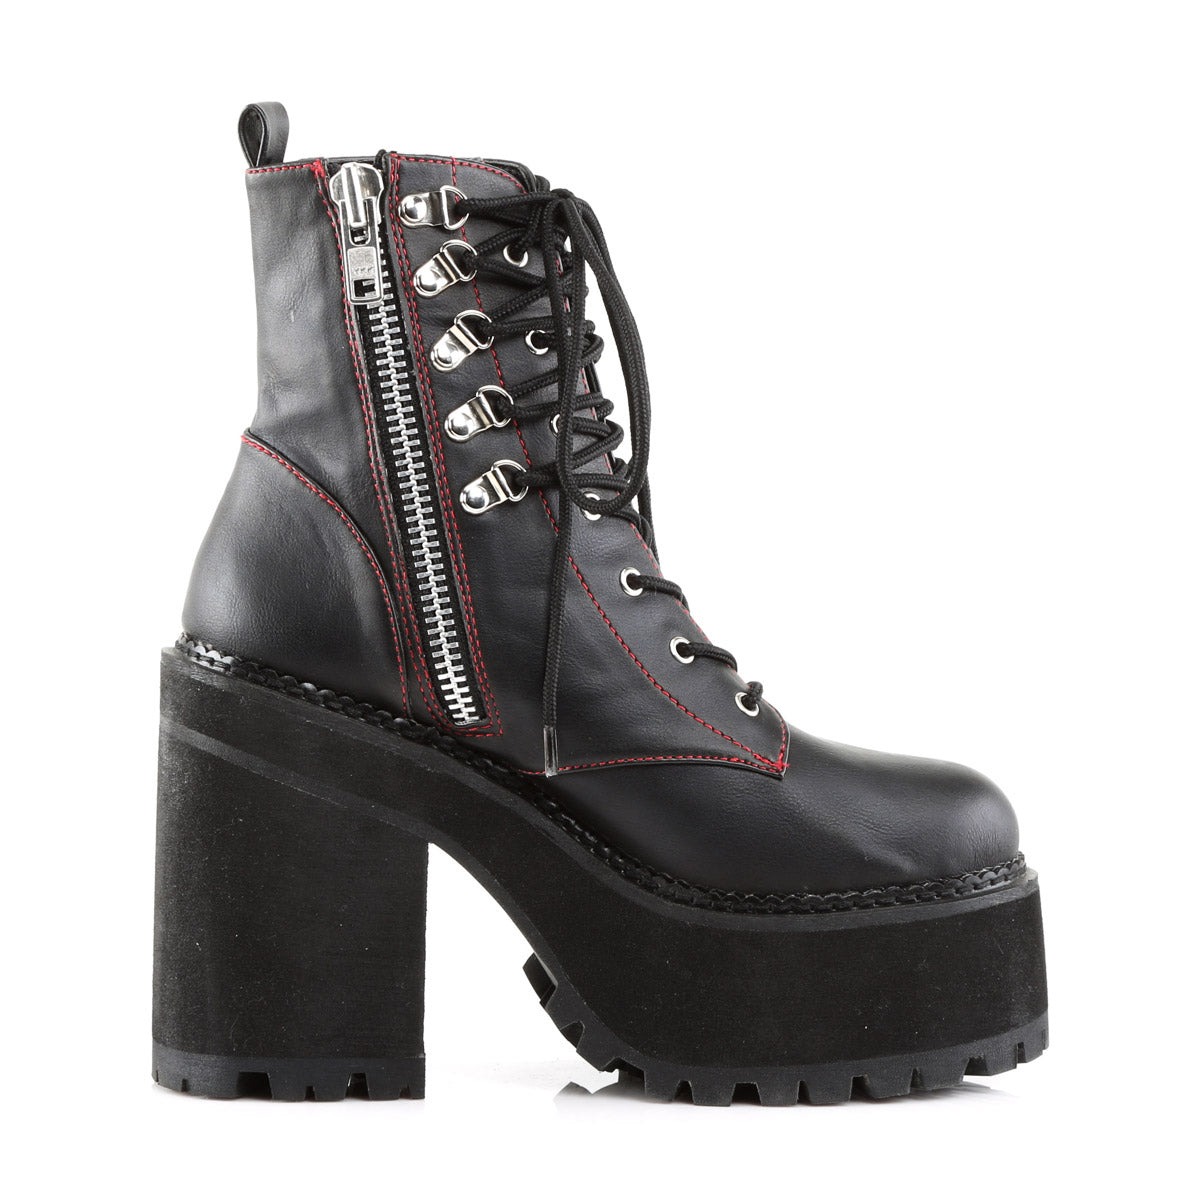 4 3/4" Heel, 2 1/4" Pf D-ring Lace-up  Ankle Boot, Side Zip Pleaser Demonia ASSAULT/100